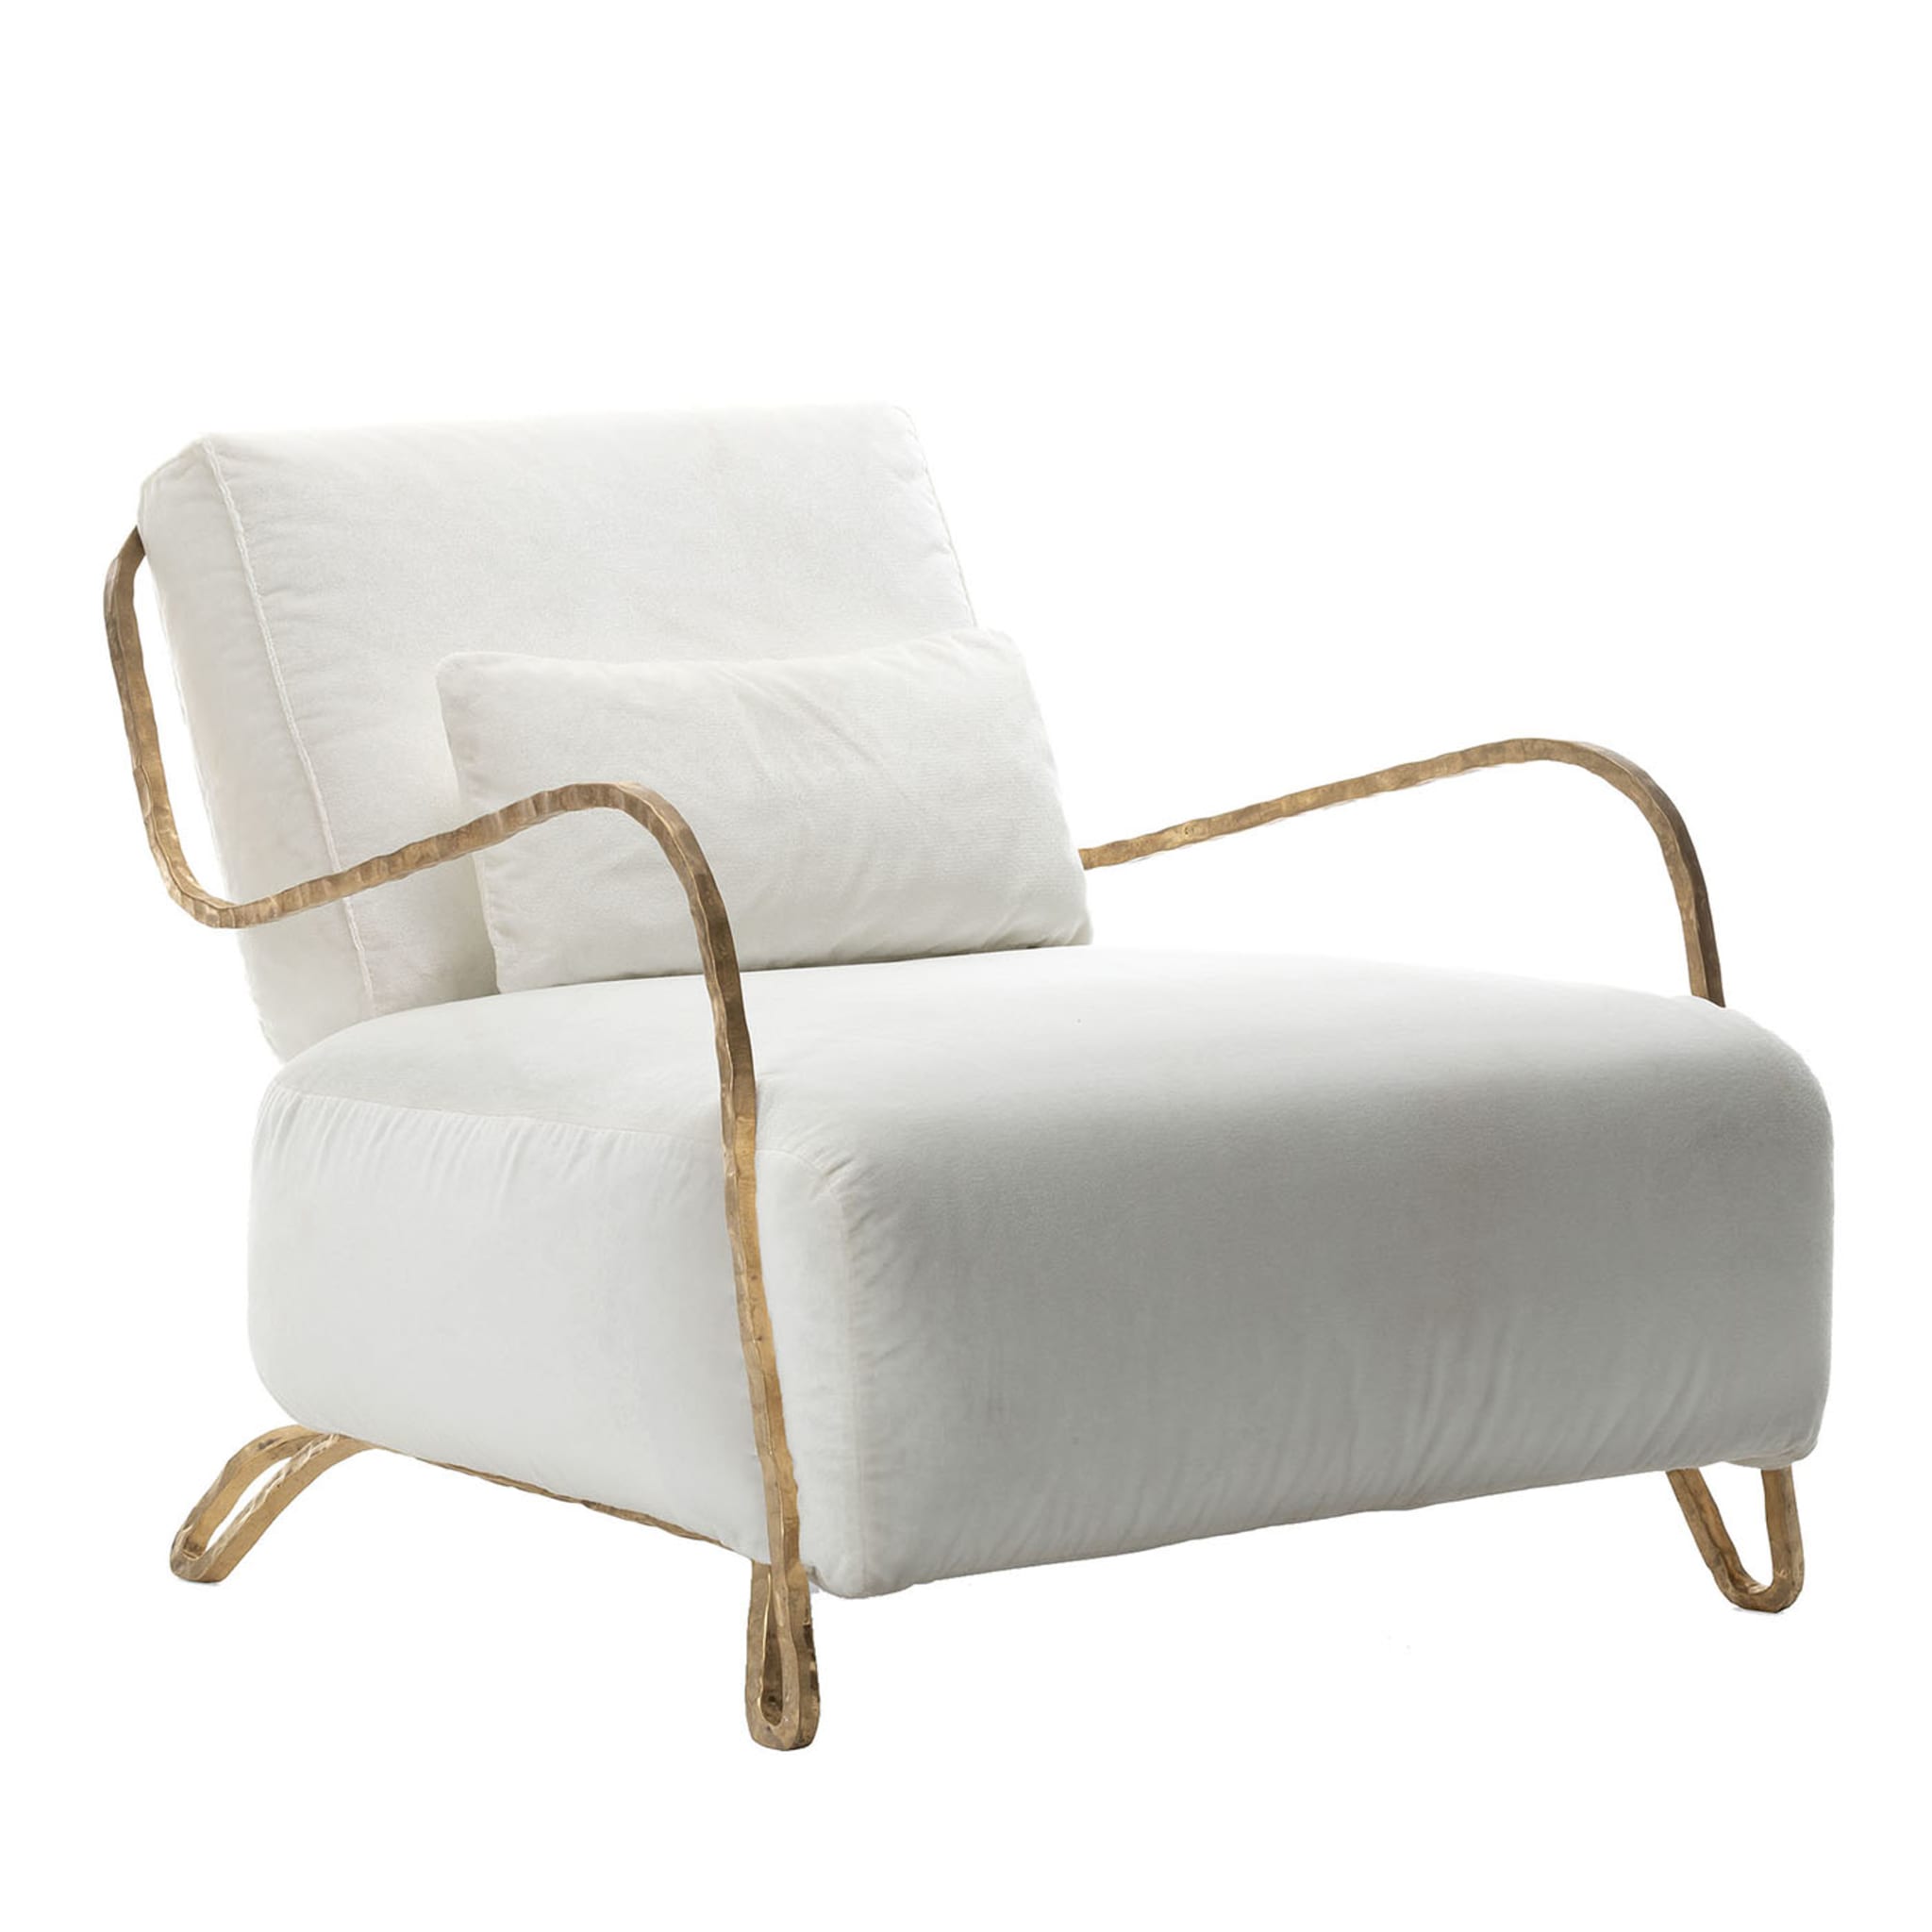 Moonlight White and Gold Low Armchair - Main view